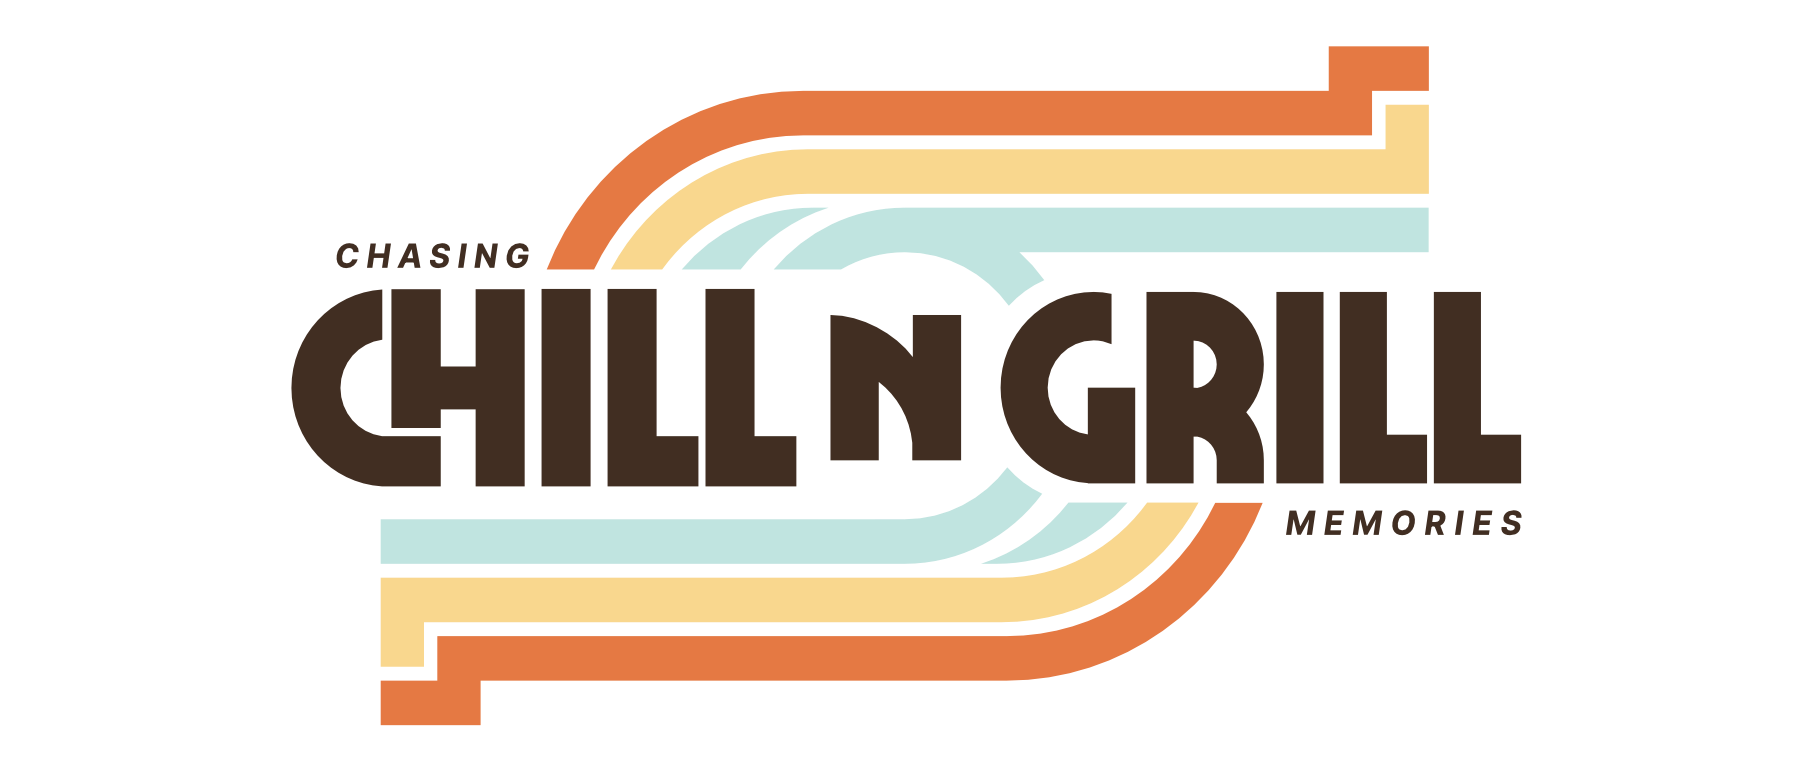 Chill'n'Grill